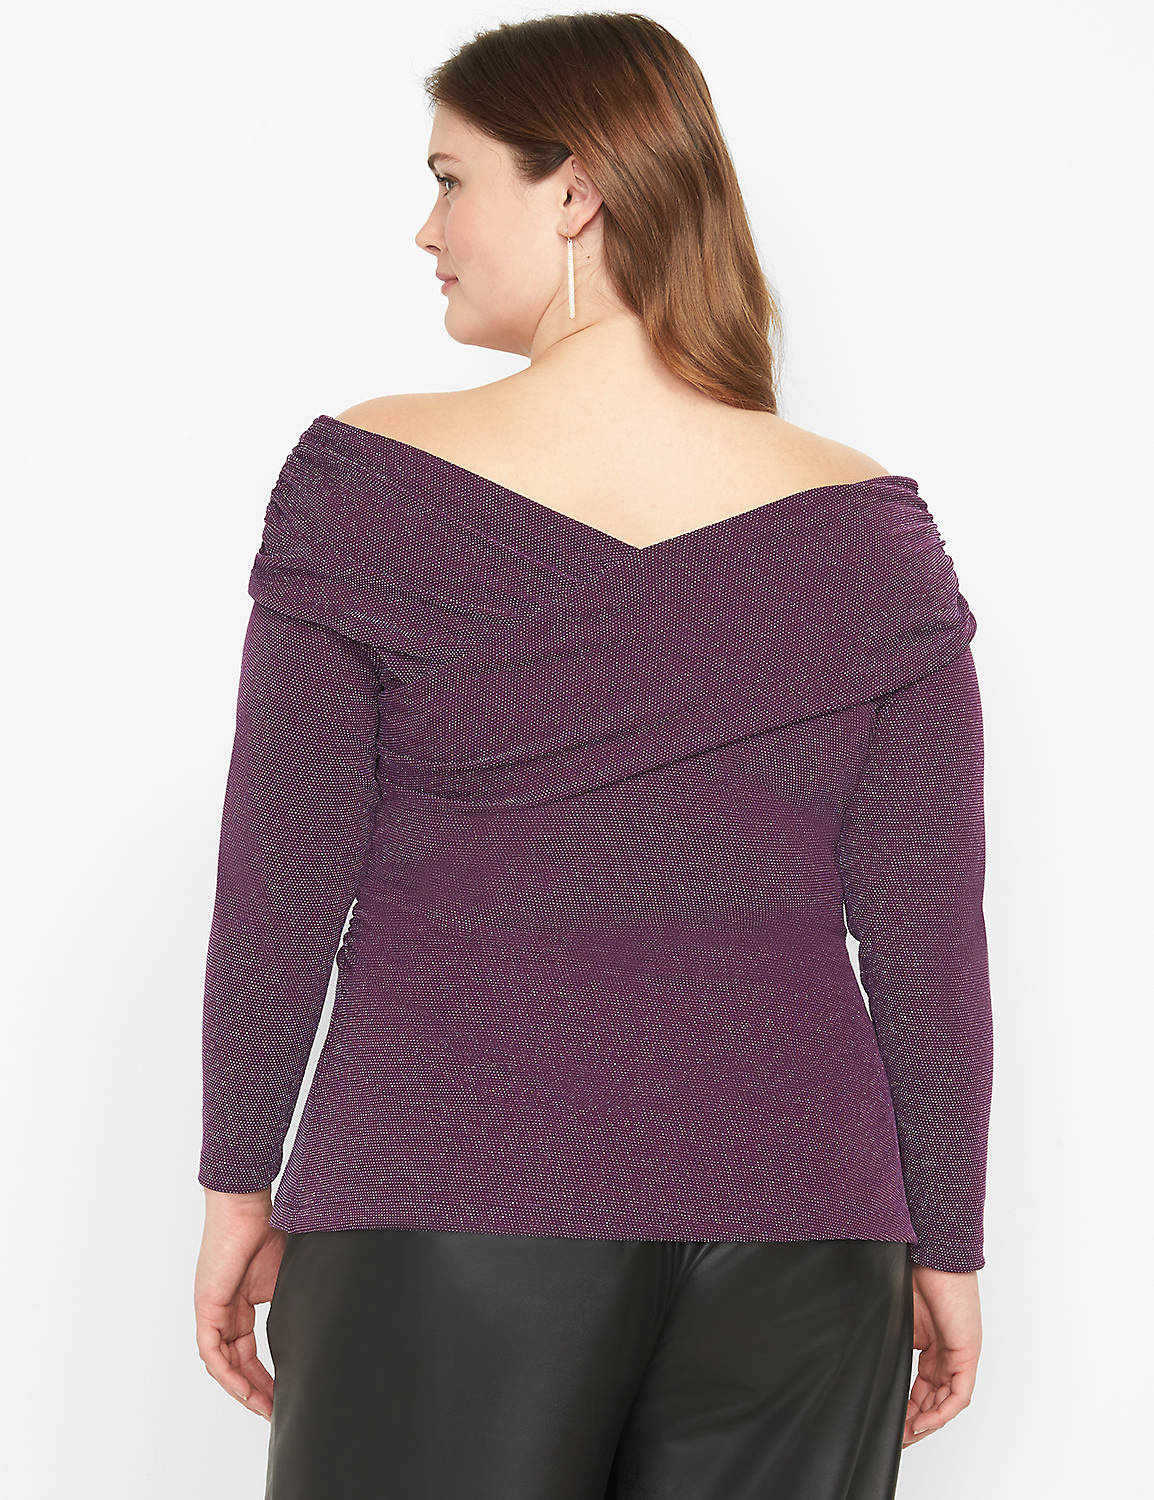 Long Sleeve Off The Shoulder Illusion Silver Lurex Knit Top 1124073:PANTONE Purple Pennant:14/16 Product Image 2